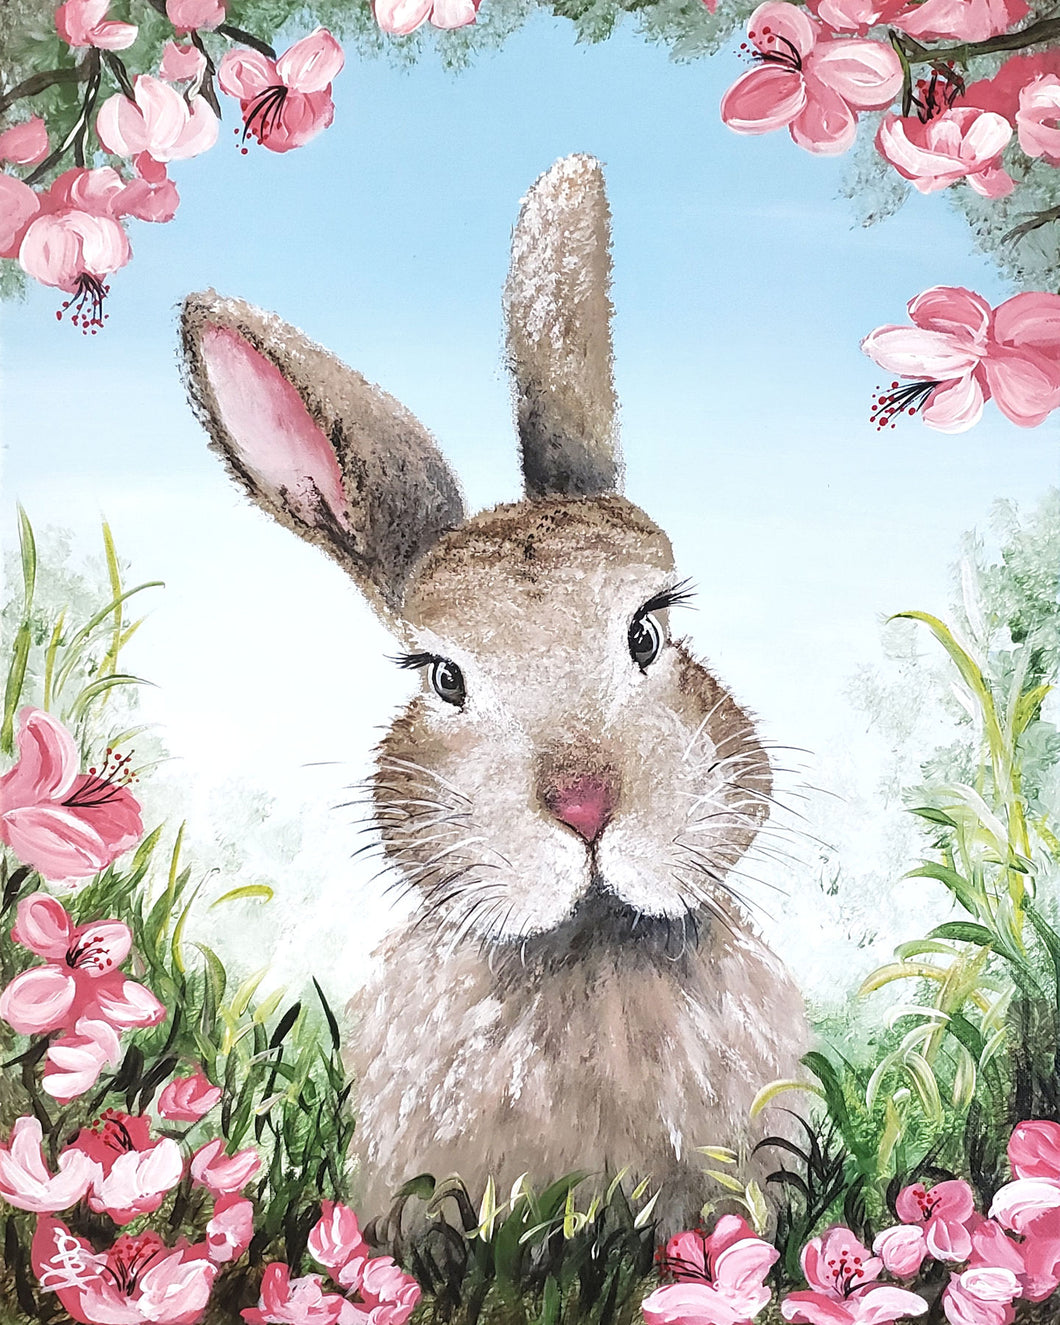 Adult Cherry Blossom Bunny Paint & Sip Event March 16th 6pm-8pm